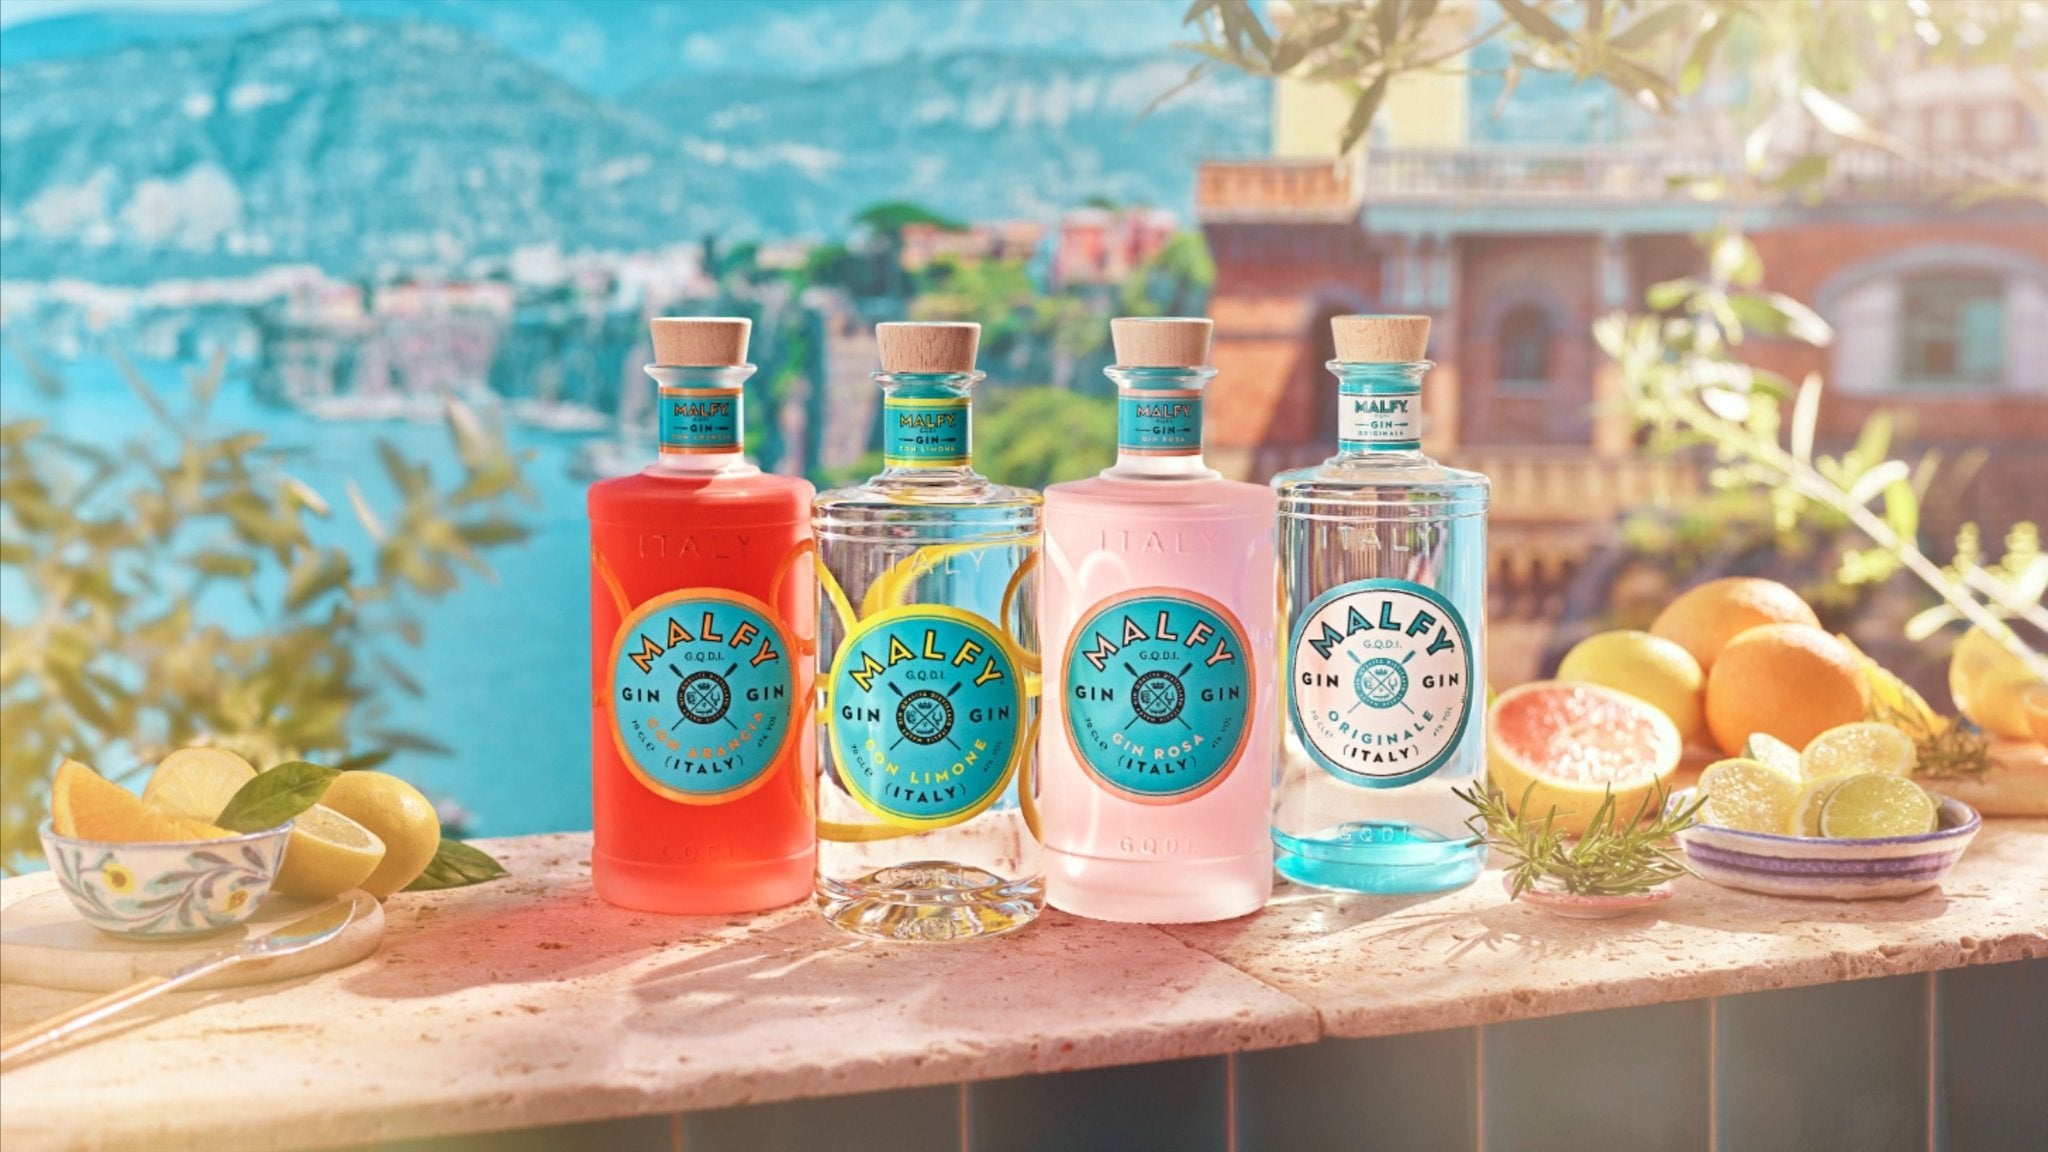 7 Malfy Gin Cocktails That'll Fly You To Amalfi - Secret Bottle